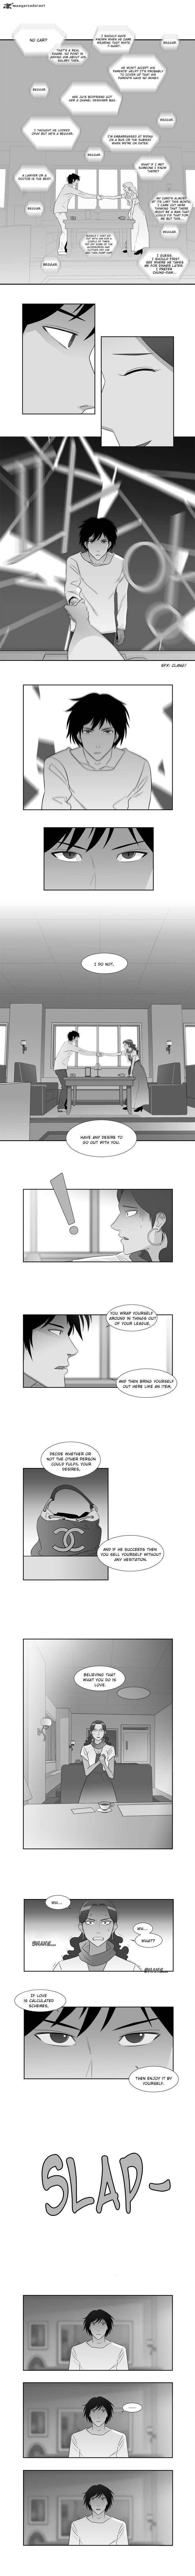 Melo Holic Chapter 5 Page 4